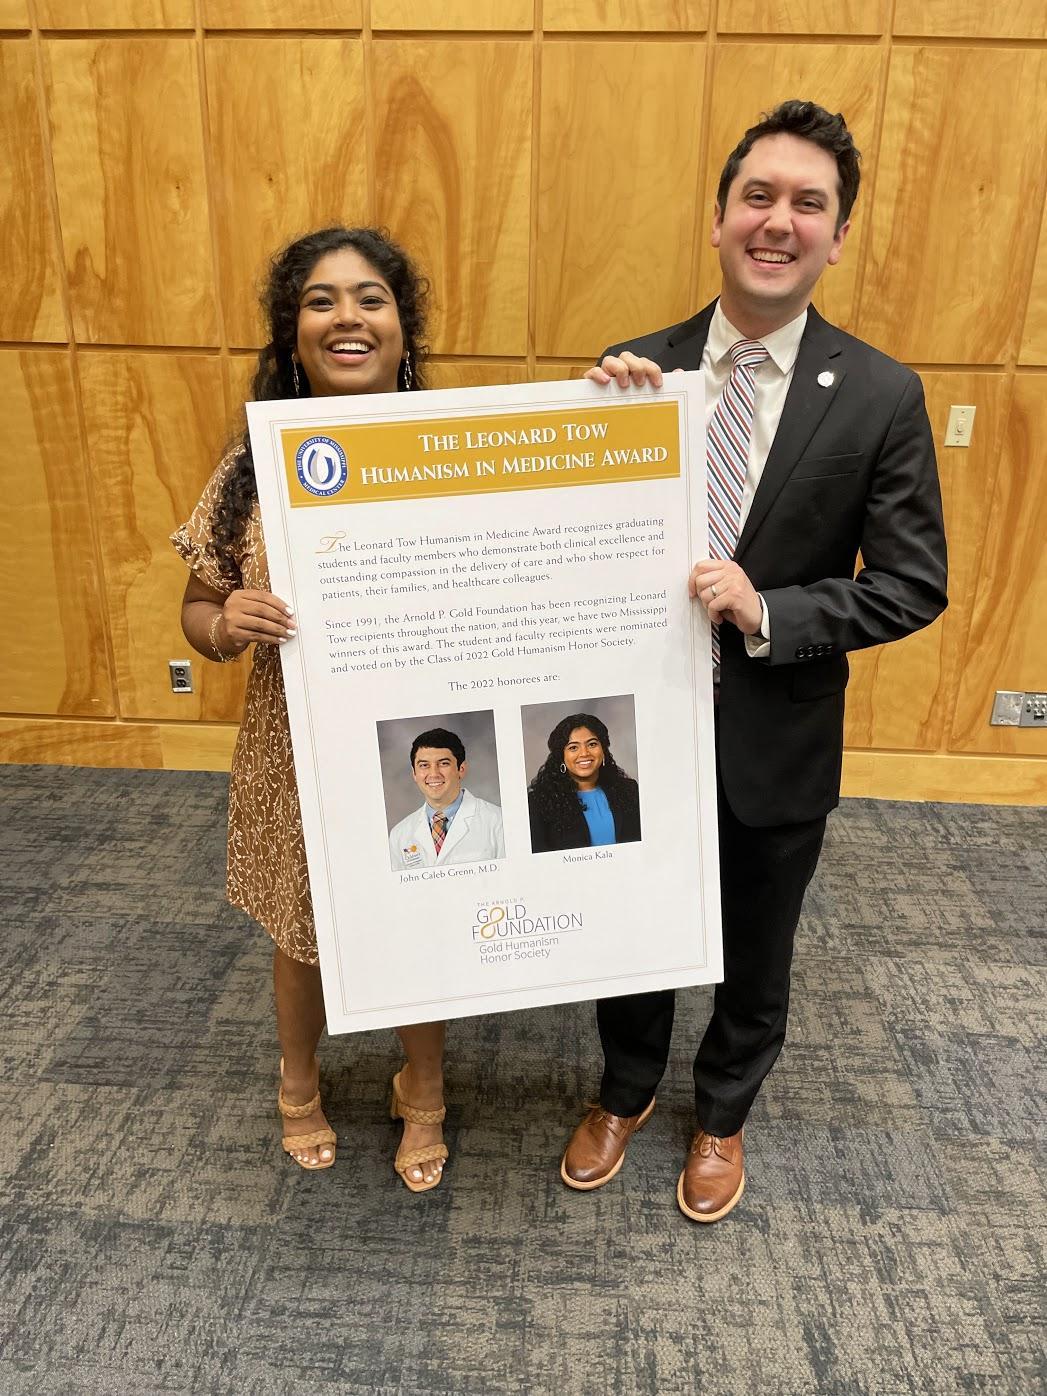 Leonard Tow Humanism in Medicine Award recipients Monica Kala and John Caleb Grenn, MD holding up a recognition poster.